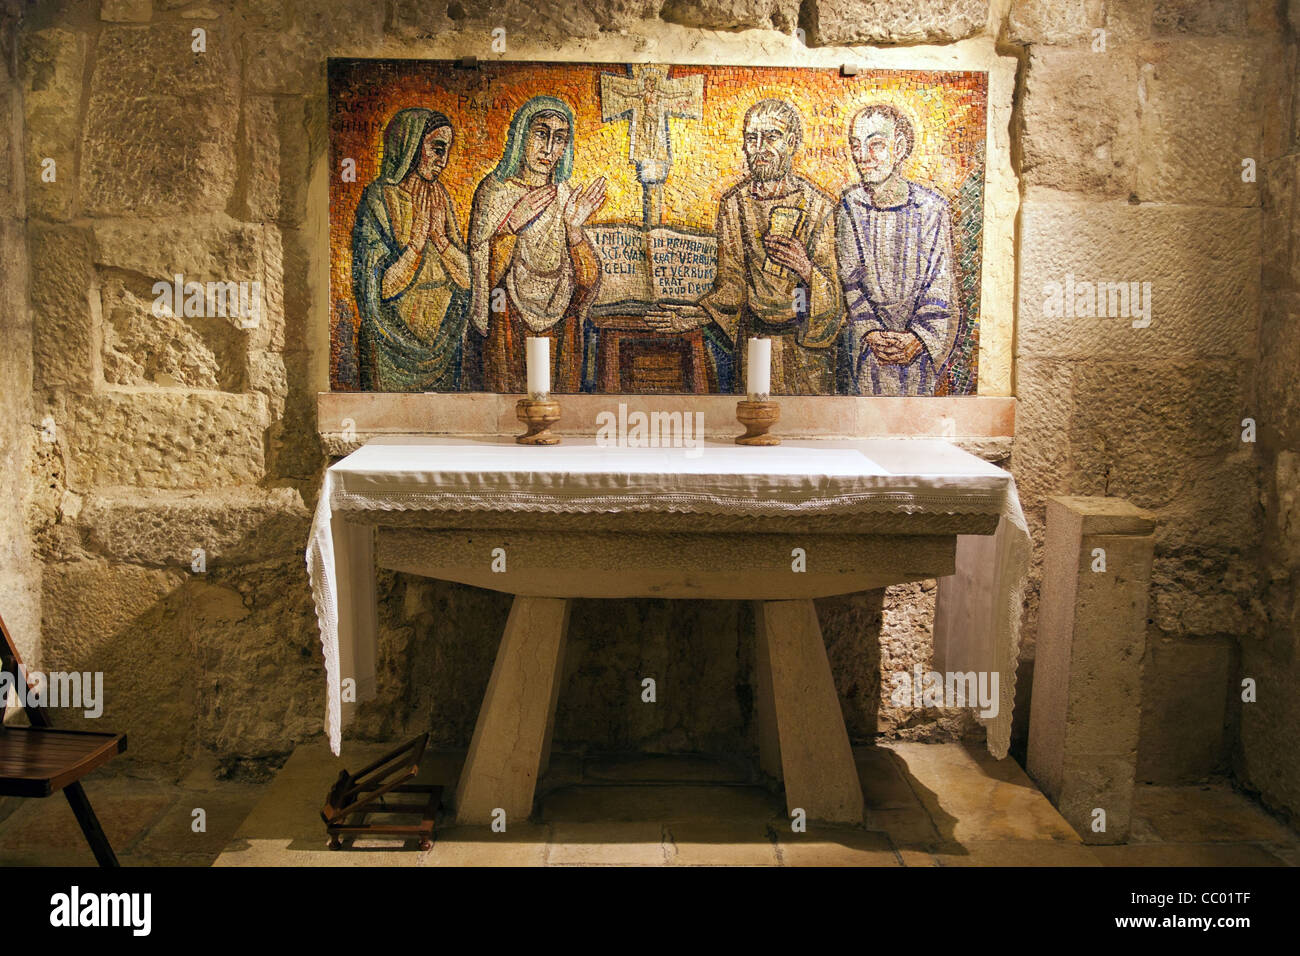 ALTAR AND MOSAIC, INTERIOR OF A CHAPEL IN THE BASILICA OF THE NATIVITY, BETHLEHEM, WEST BANK, PALESTINIAN AUTHORITY Stock Photo